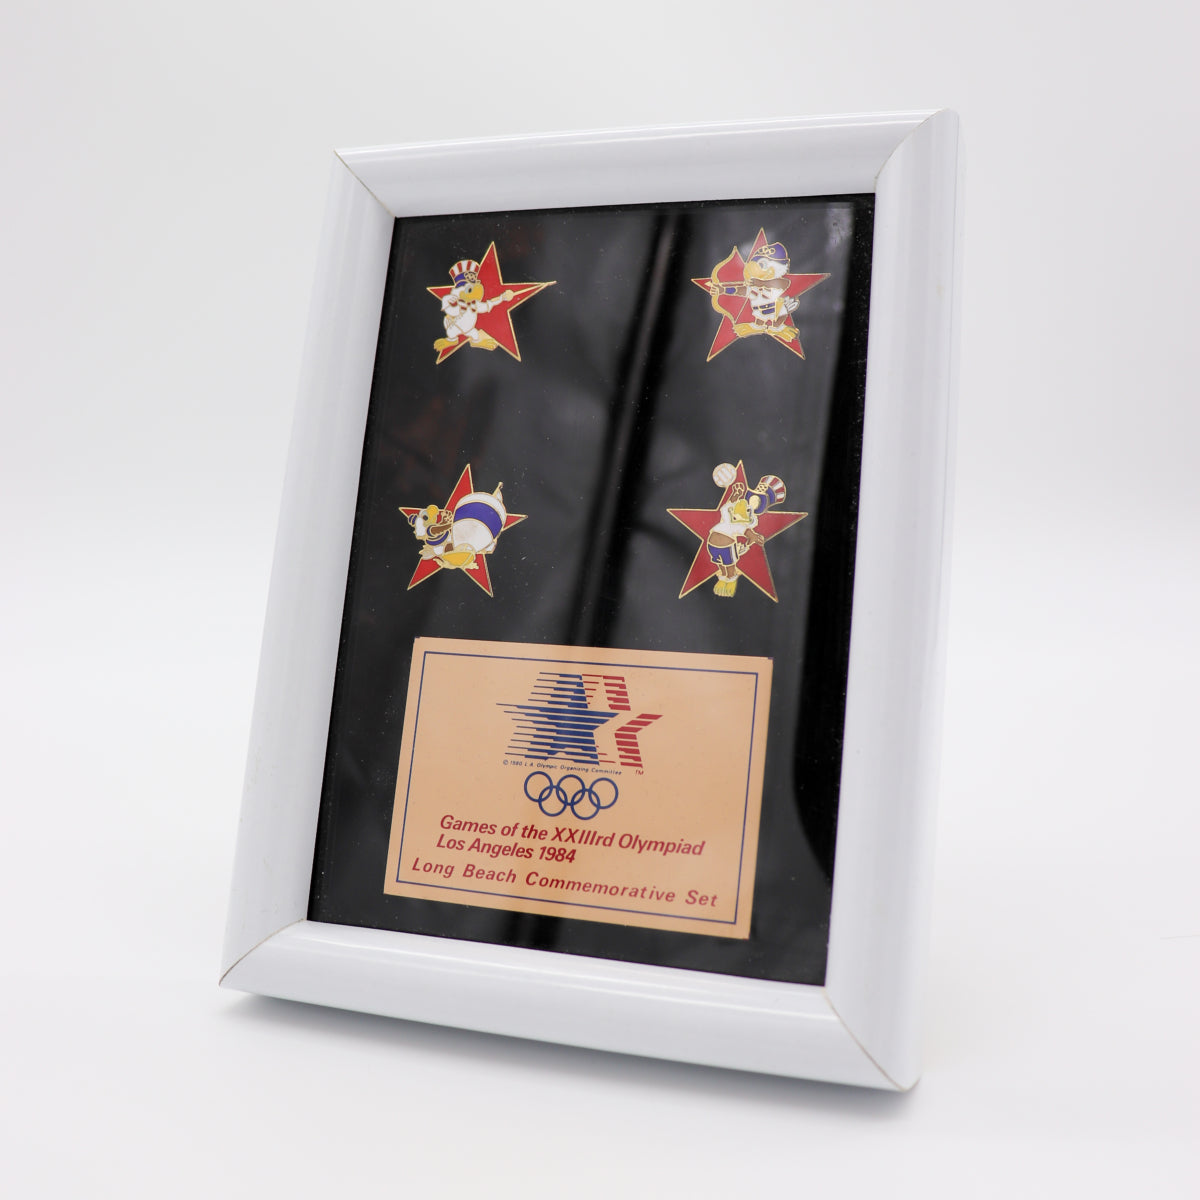 1984 Games of the XXXIIIrd Olympiad Los Angeles Summer Olympics Long Beach Commemorative Pin Set, Framed